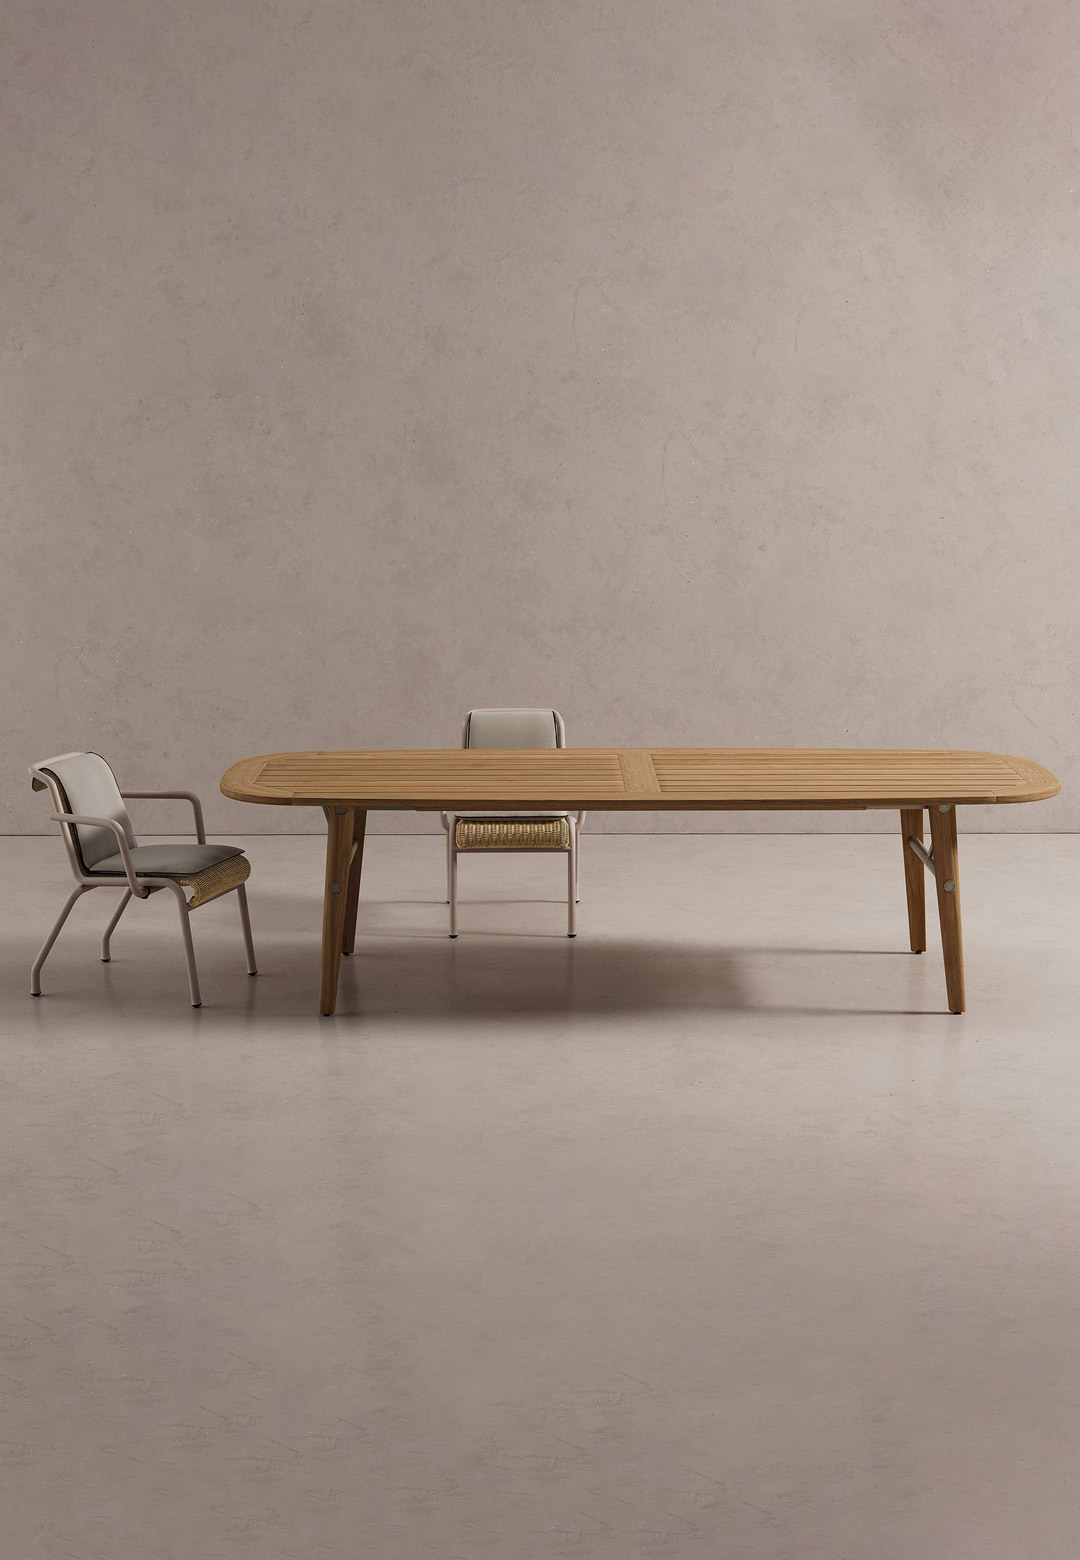 Kettal STIRred 2023 with furniture and furnishings that aim to comfort